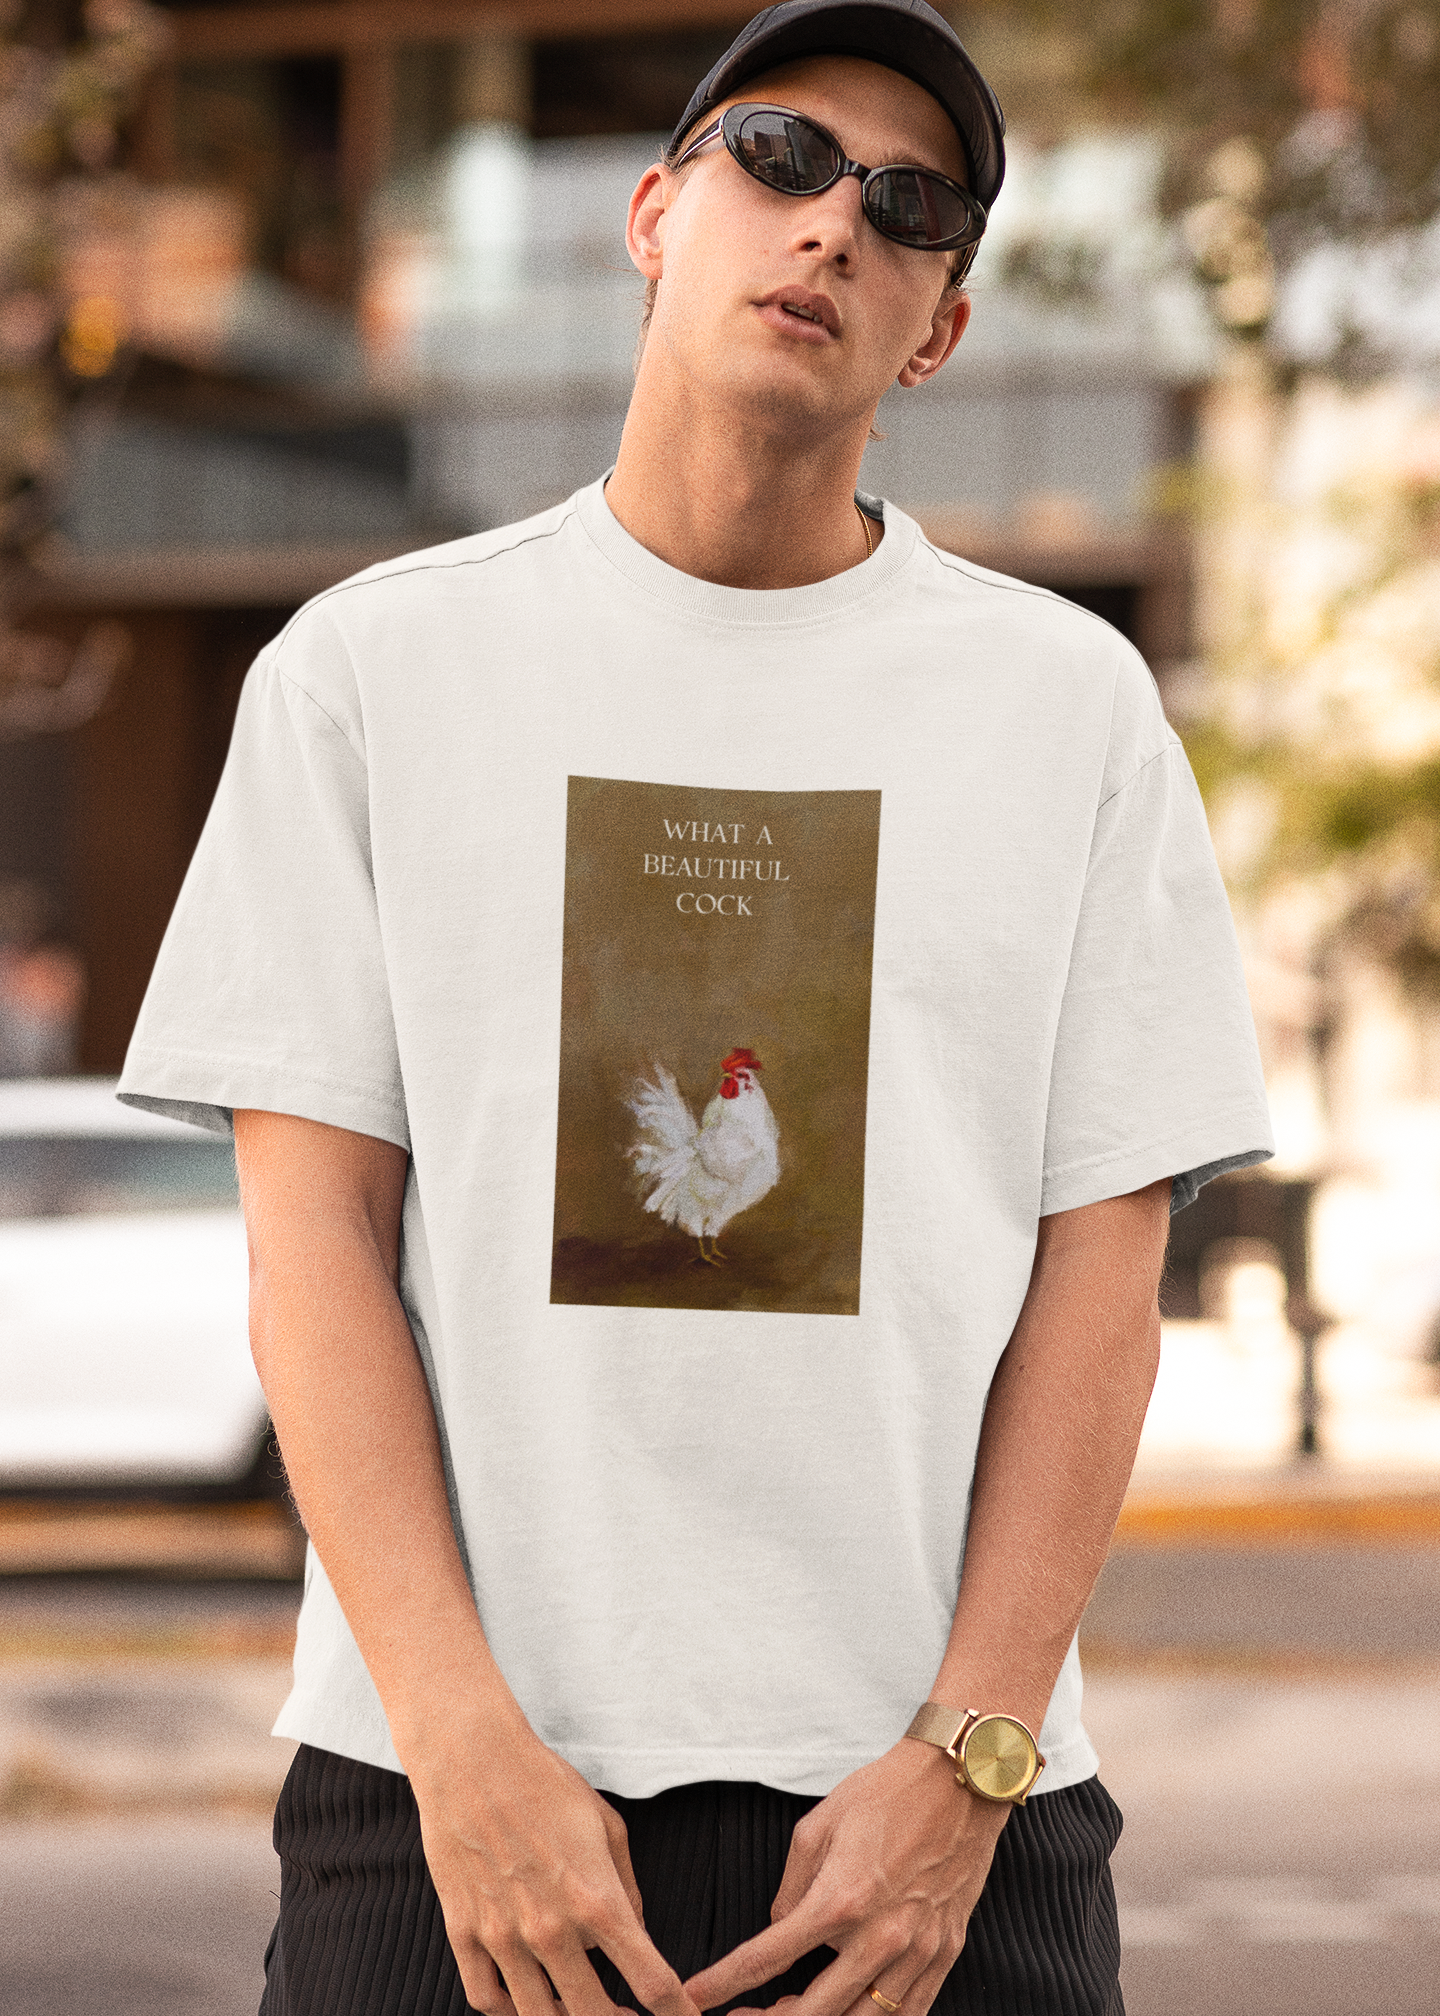 mockup-of-a-man-wearing-an-oversized-t-shirt-and-sunglasses-m25272_1_cfe87af7-ac6c-42bb-8ad4-cc139794075b.png